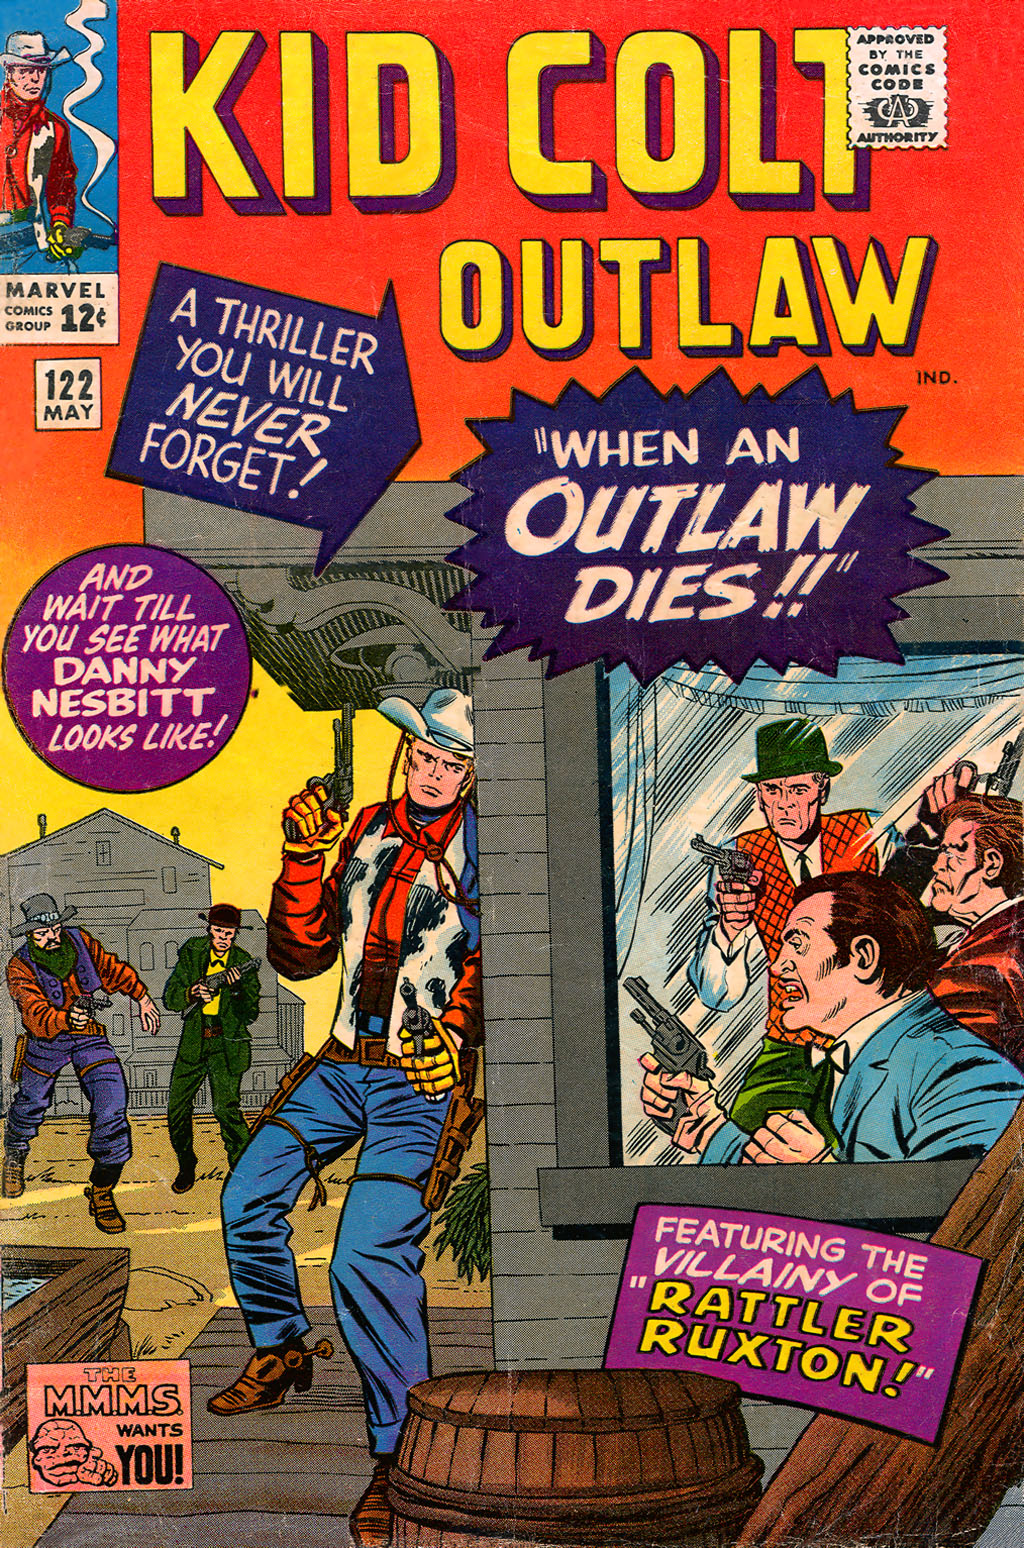 Read online Kid Colt Outlaw comic -  Issue #122 - 1